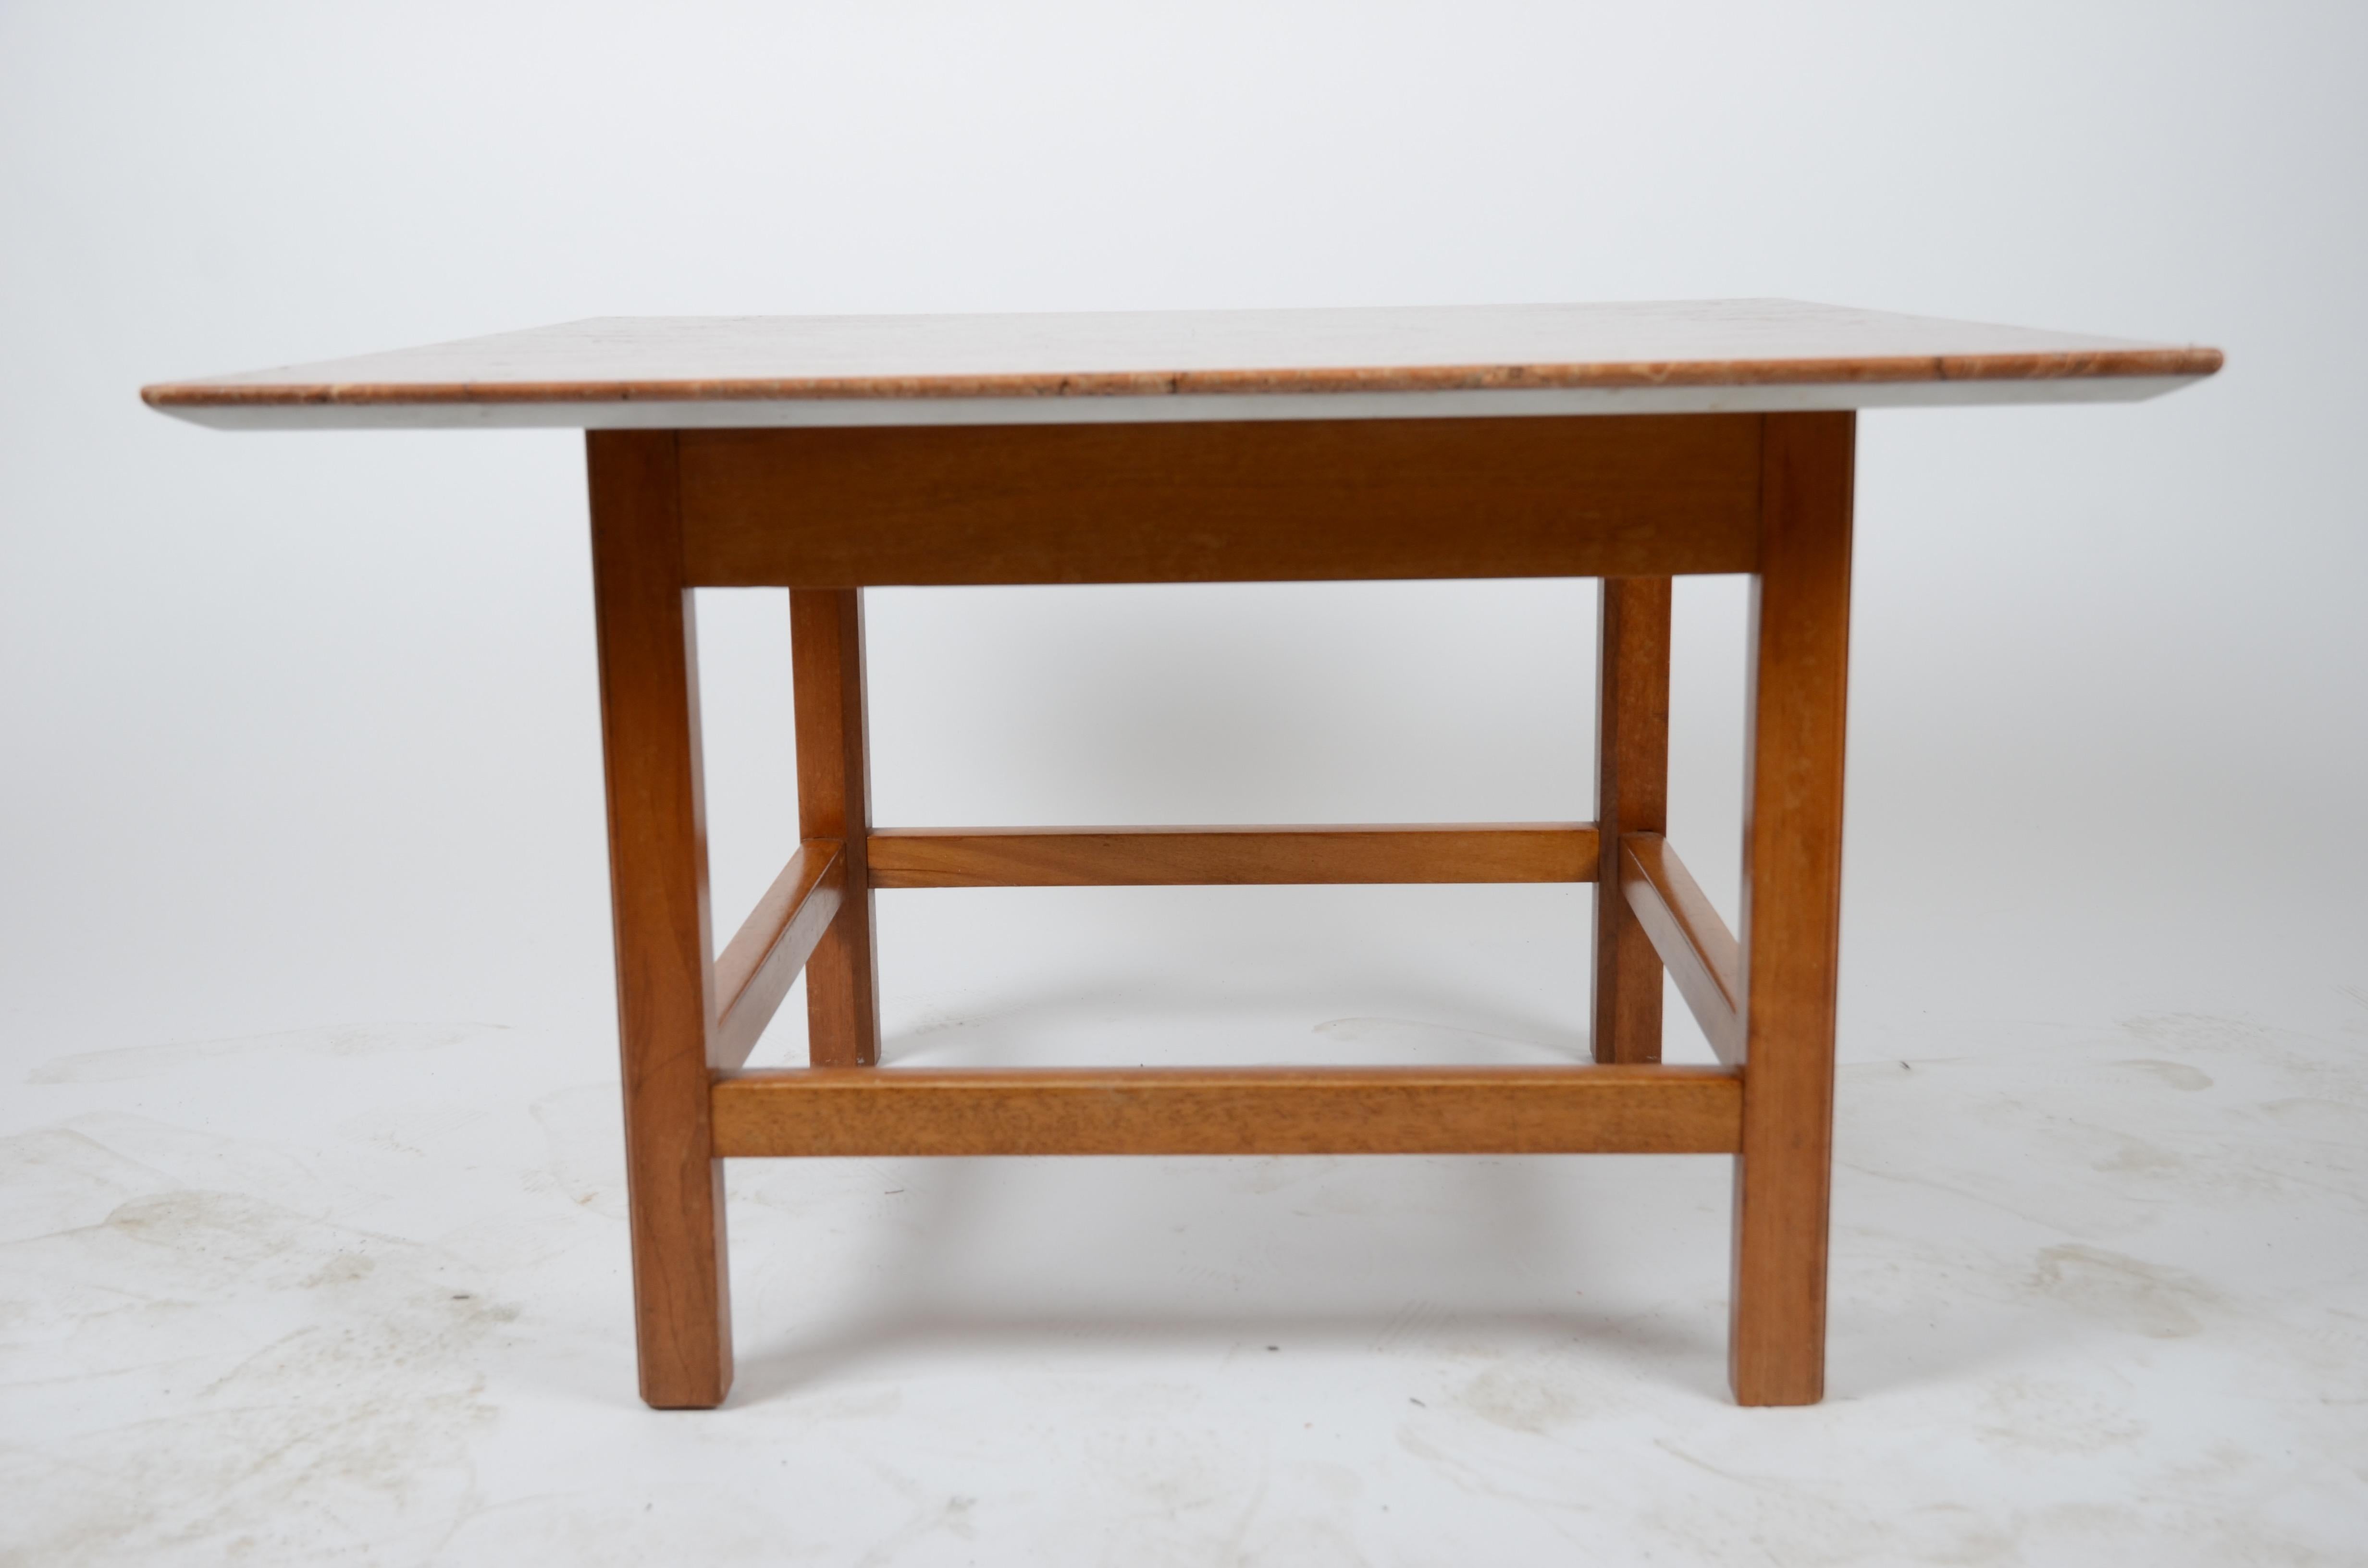 An occasional table with marble top. Designed by Josef Frank for Firma Svenskt Tenn, 1940s-1950s.